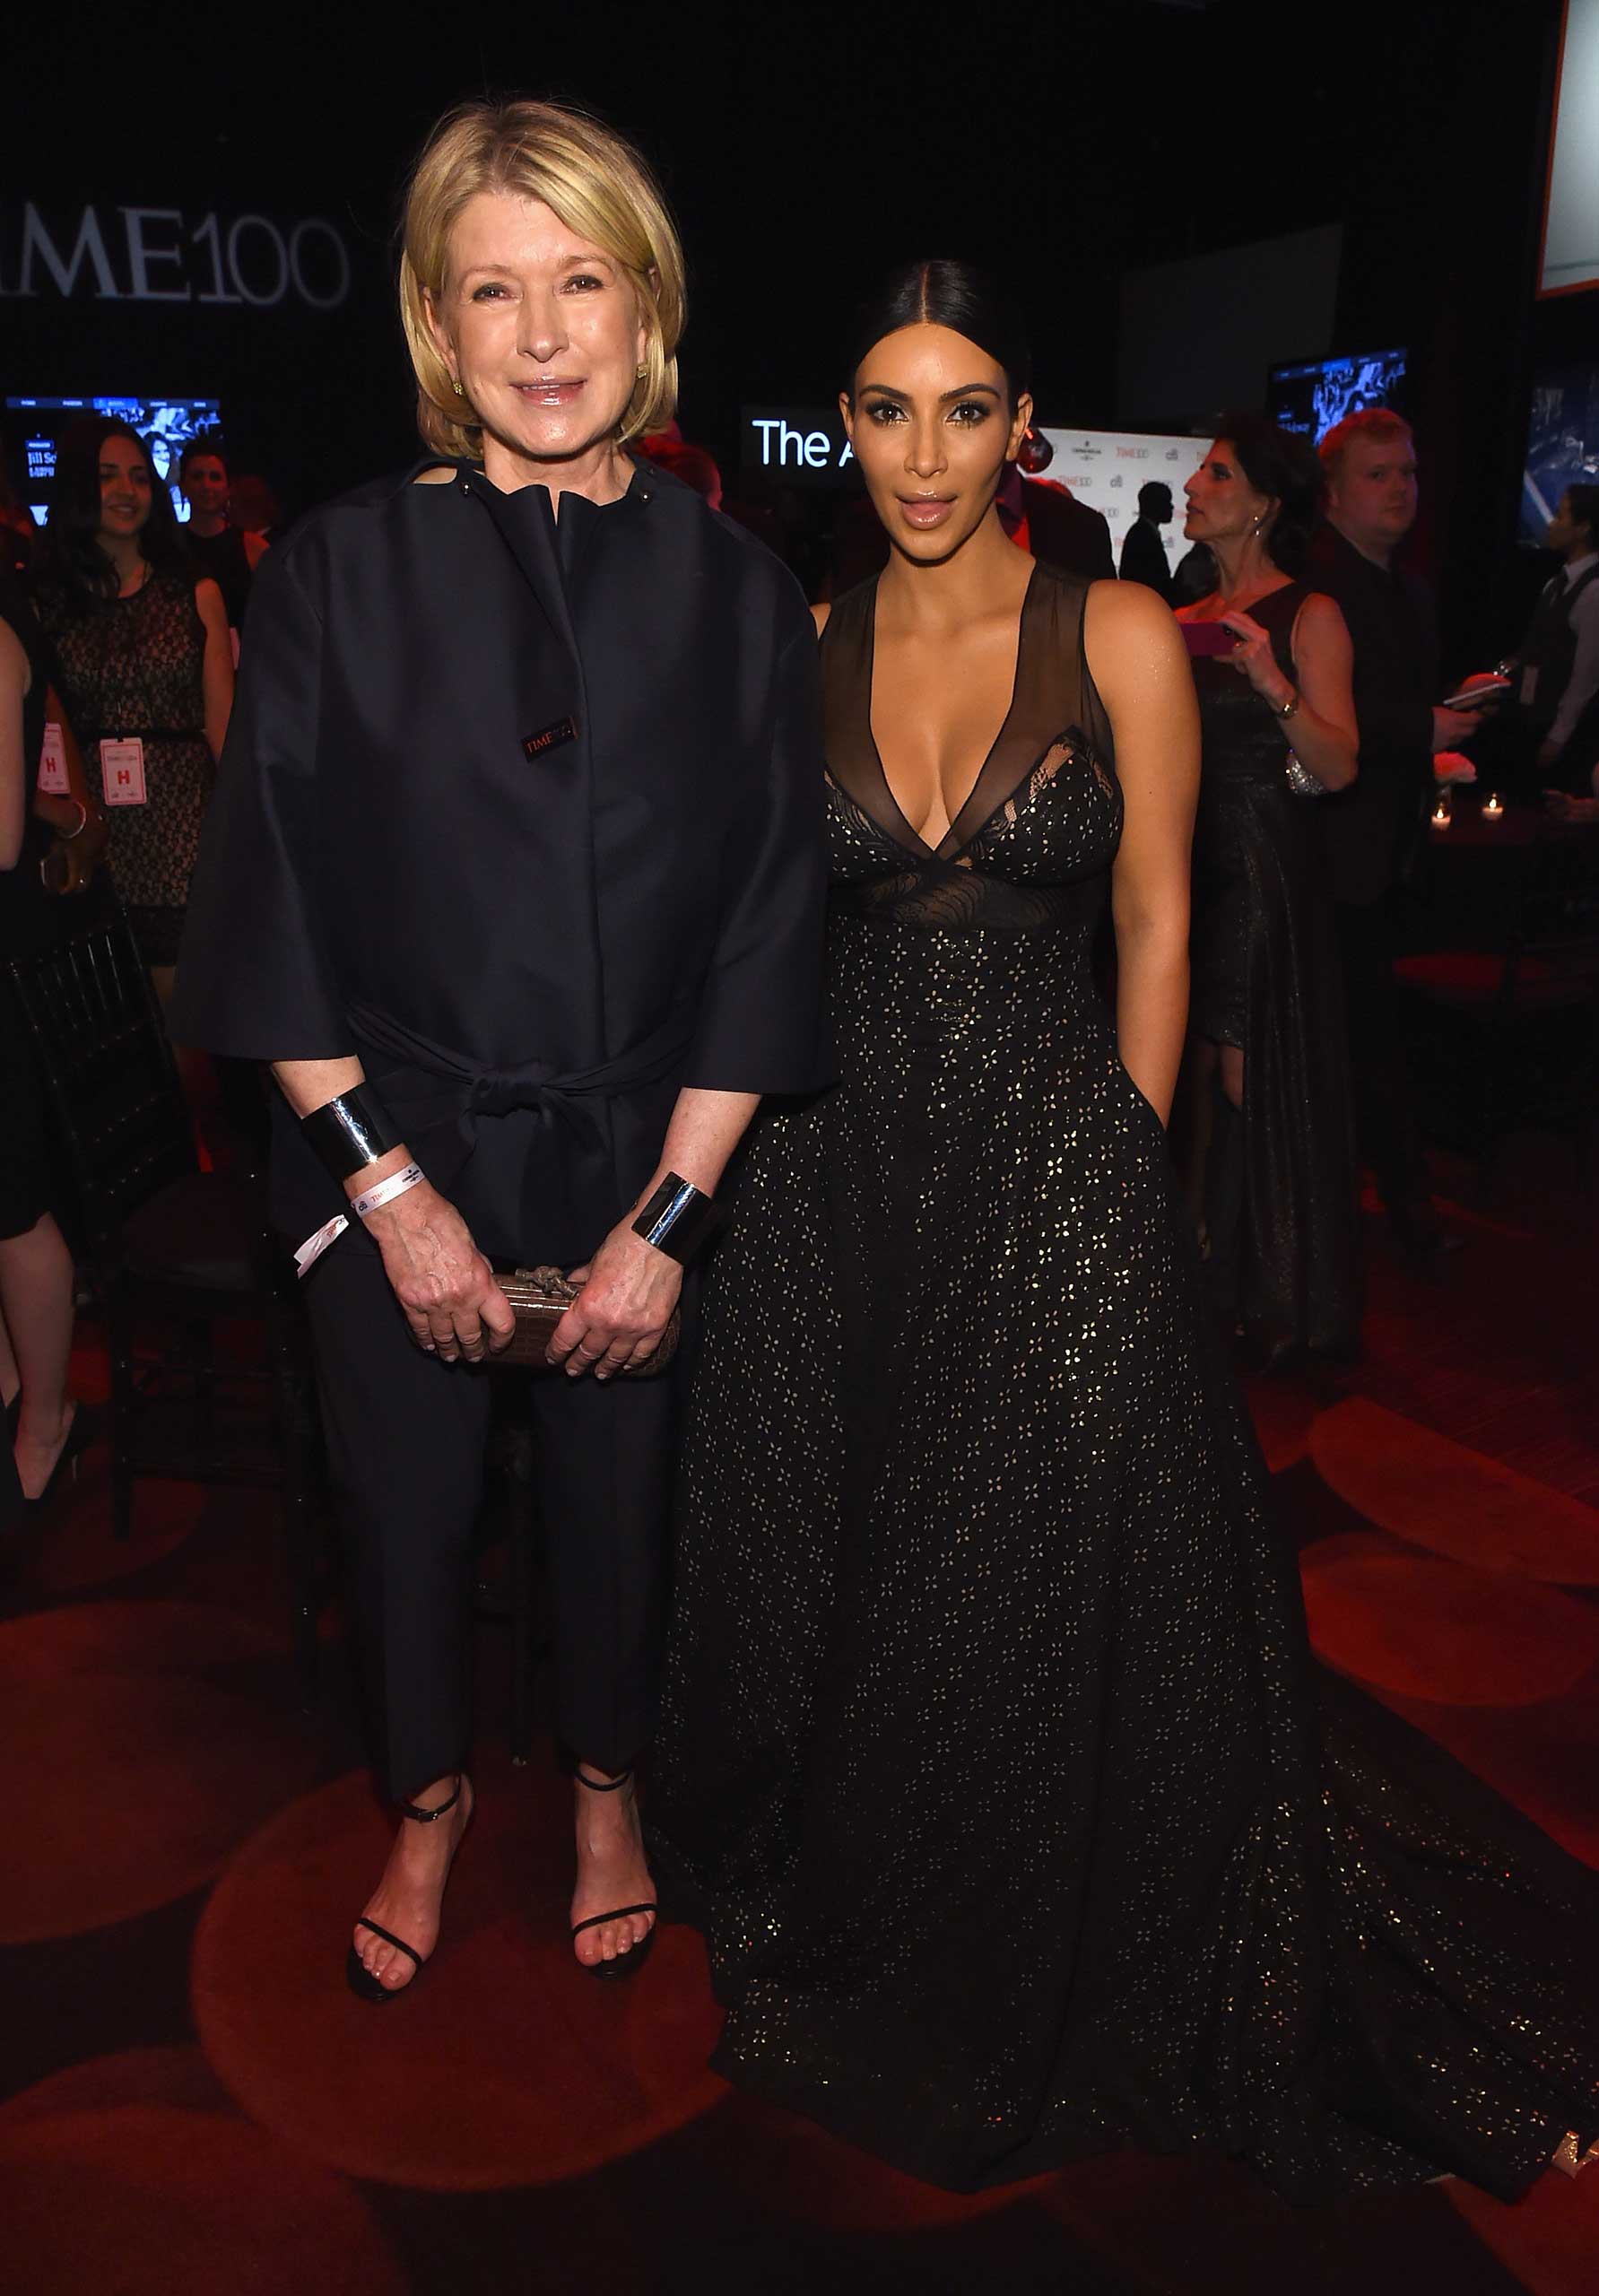 Martha Stewart and Kim Kardashian West attend the TIME 100 Gala at Jazz at Lincoln Center in New York City on Apr. 21, 2015. (Larry Busacca—Getty Images for TIME)